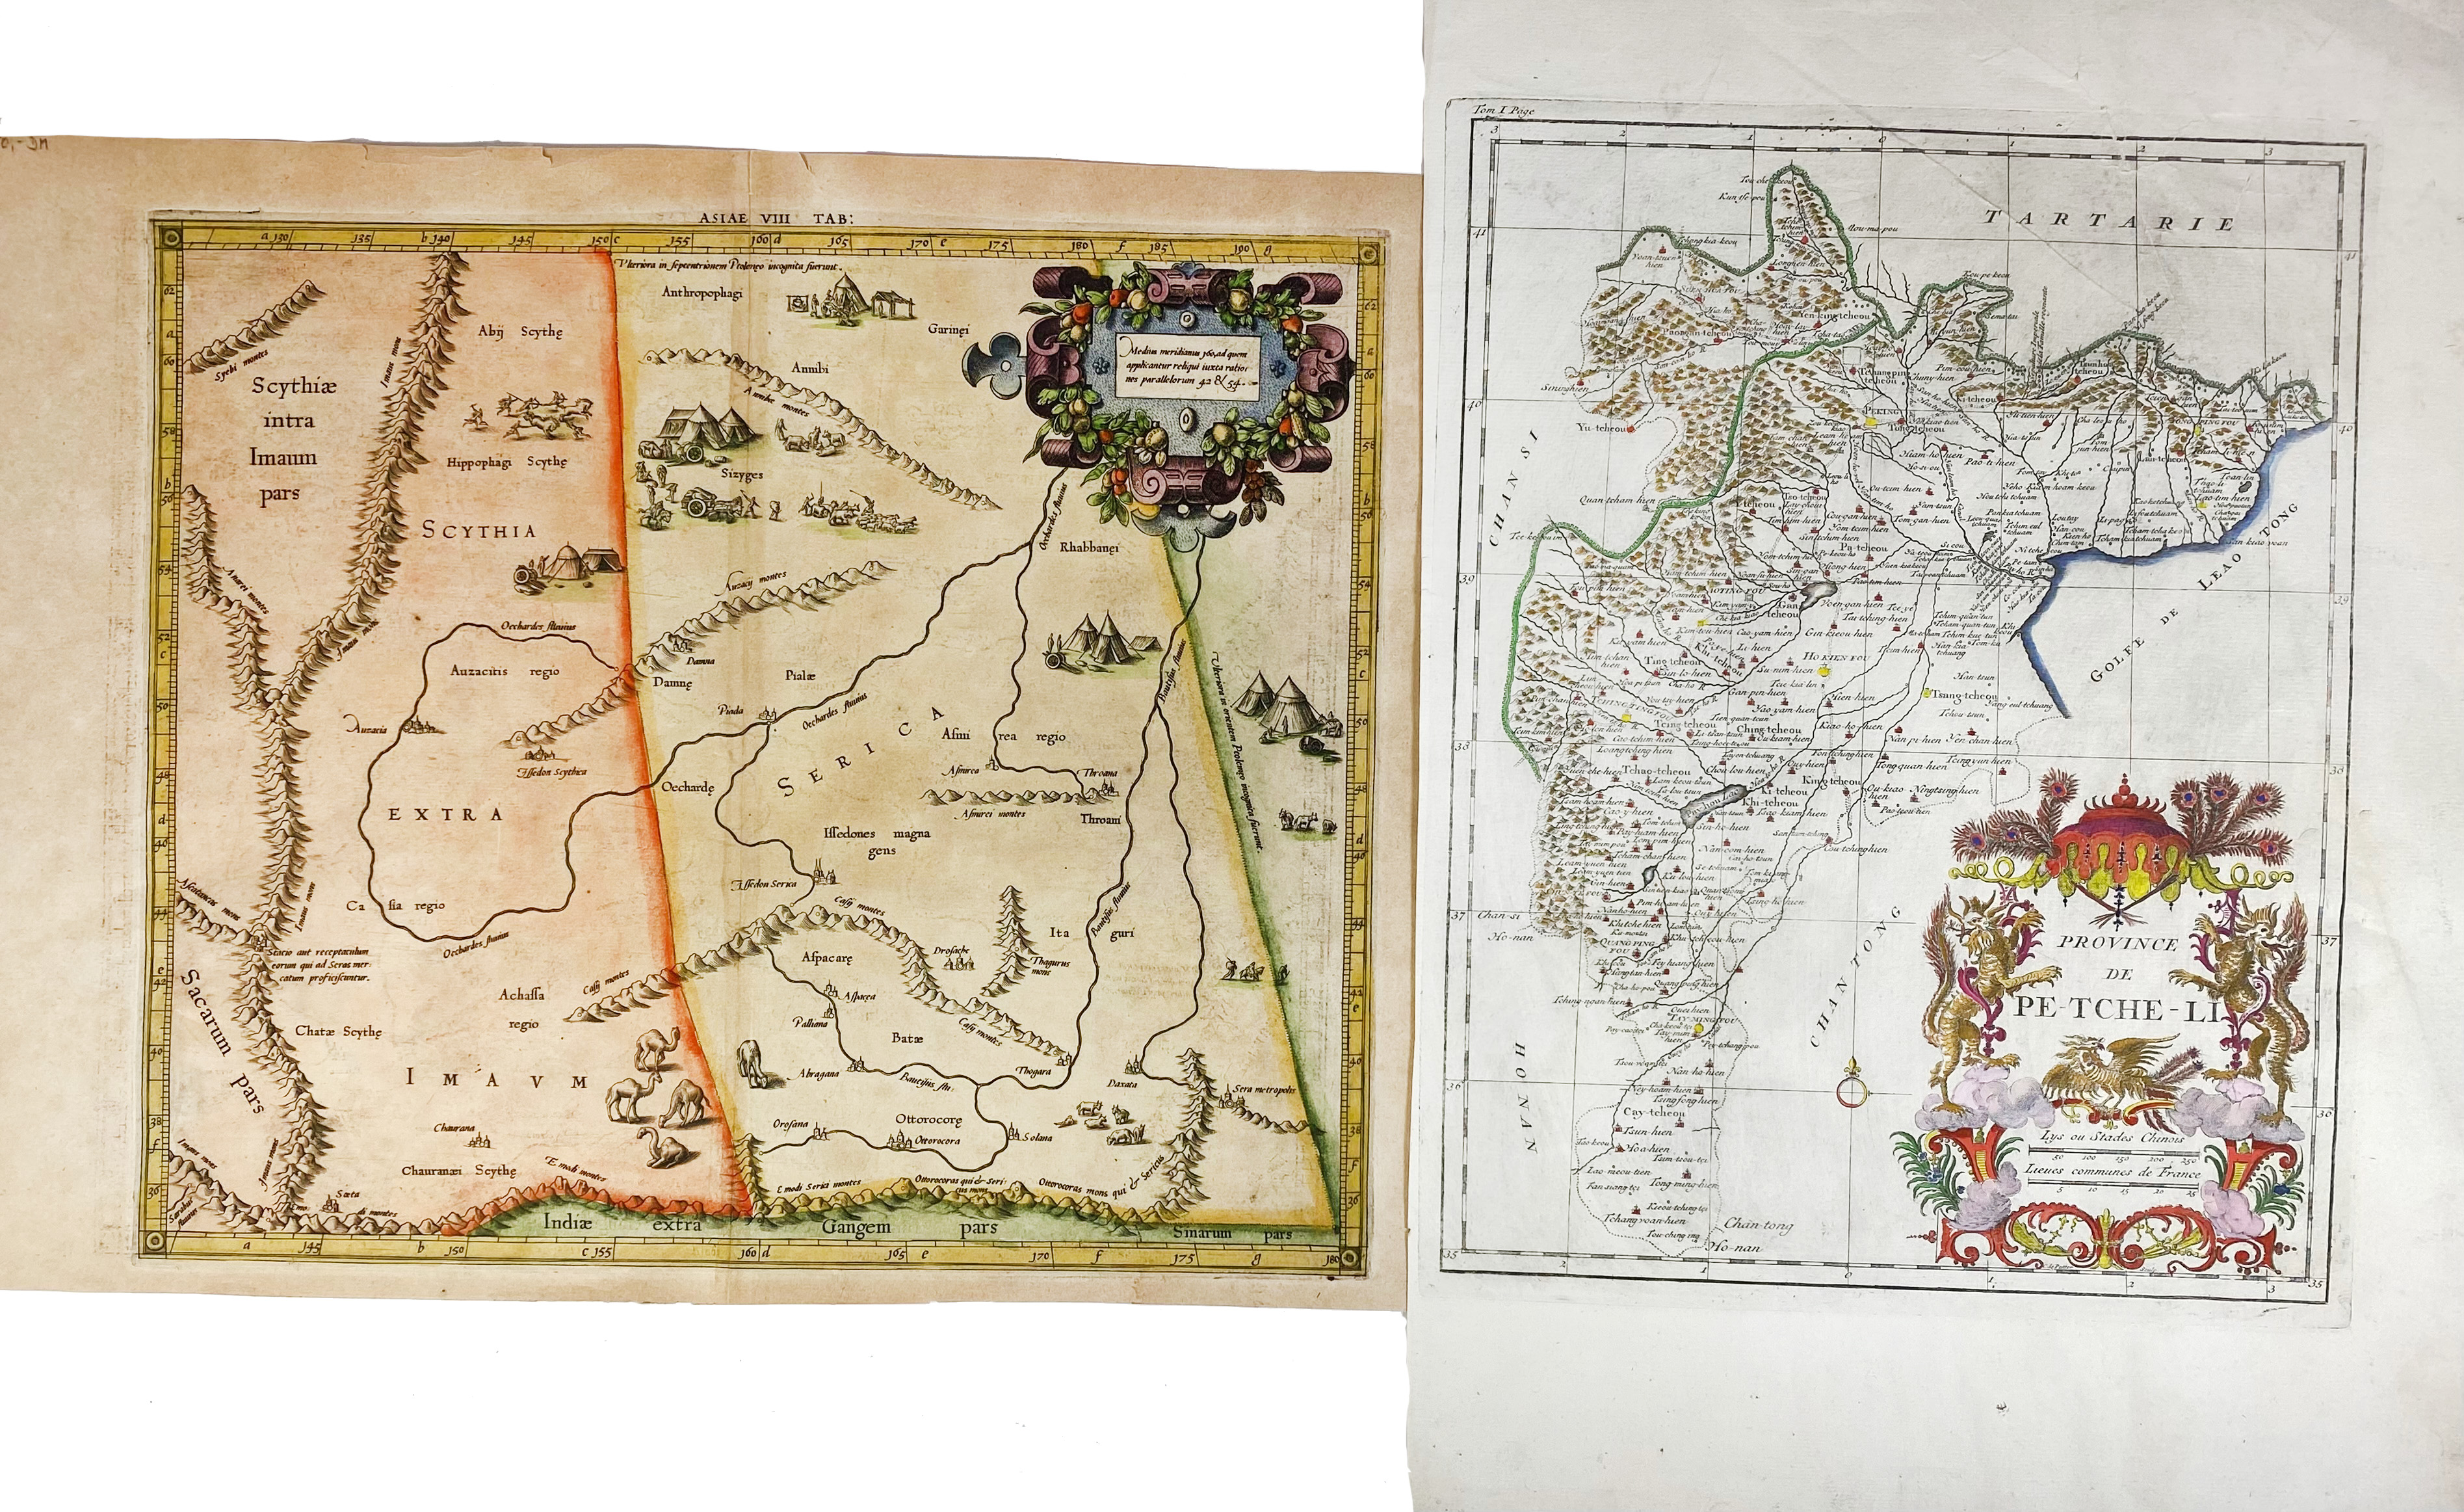 ASIA -- CHINA -- "ASIAE VIII TAB:". (c. 1600). Handcold. engr. map of Central